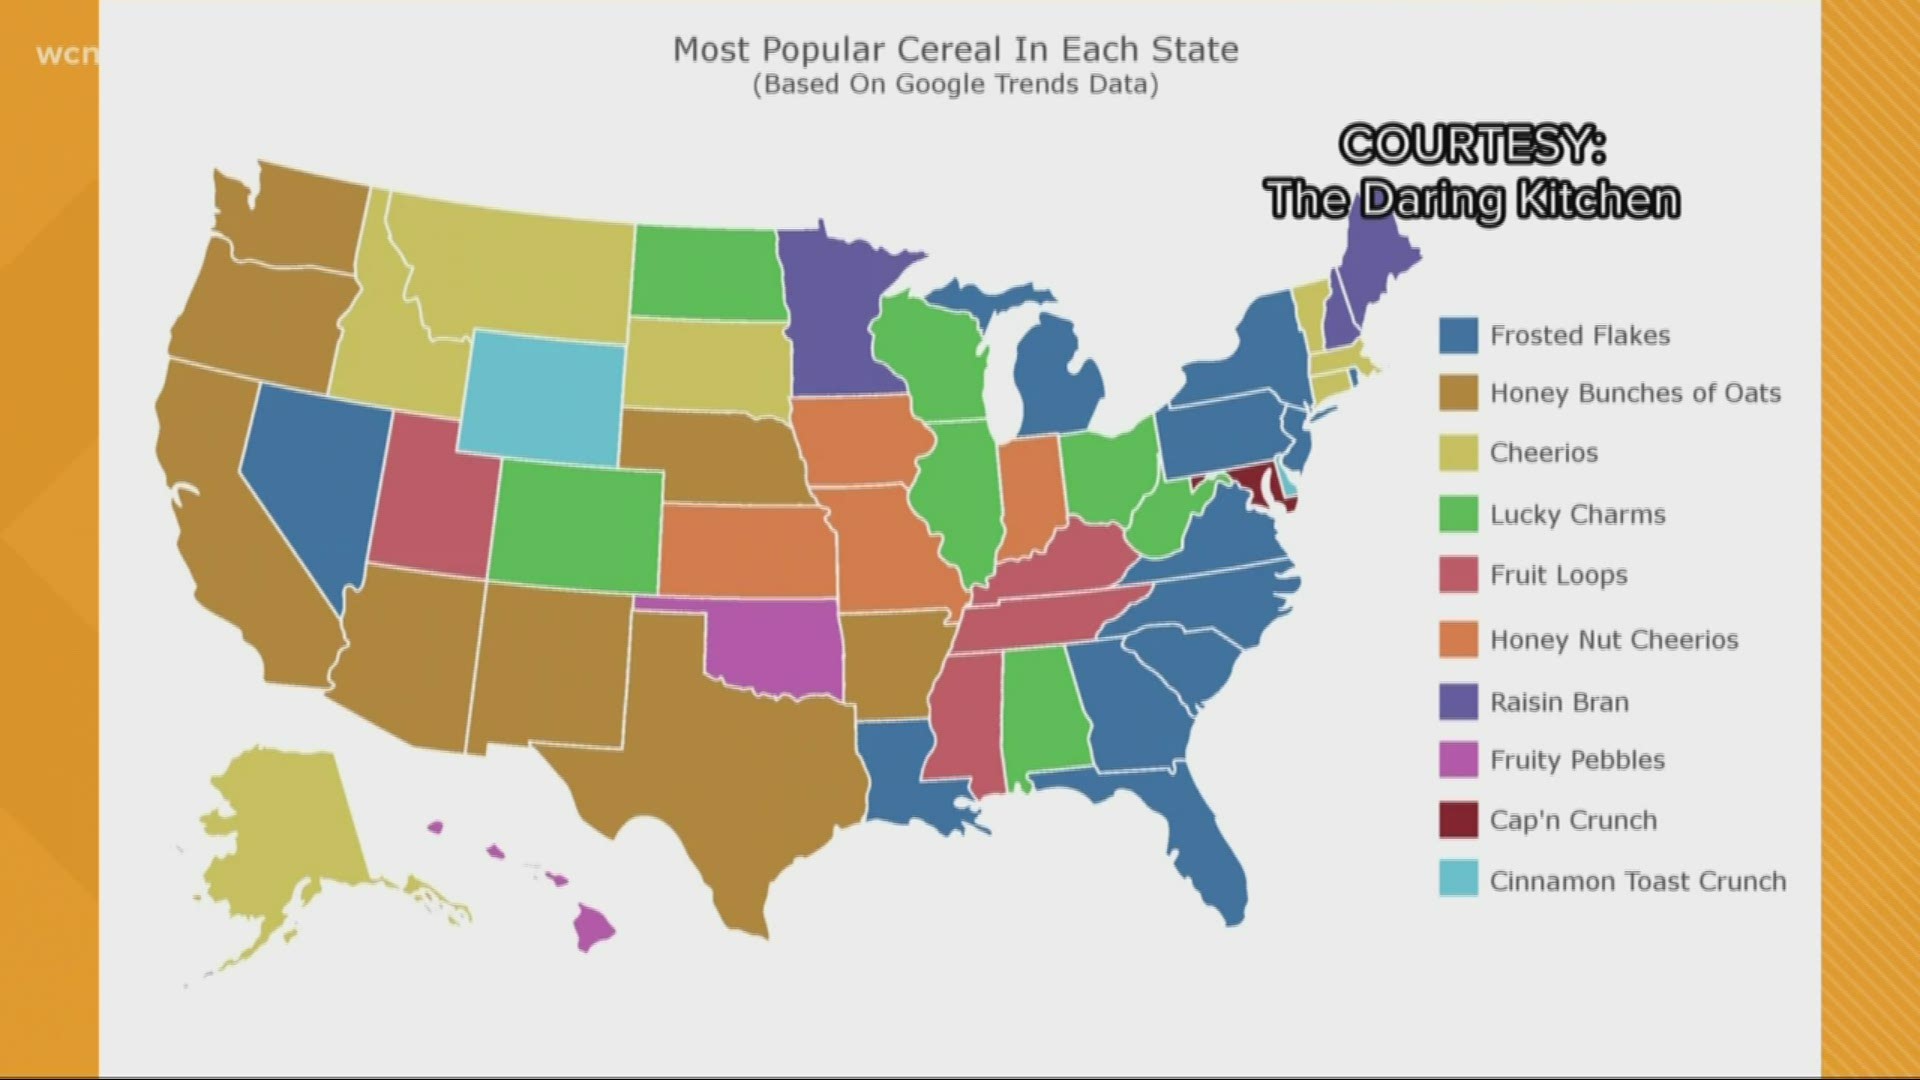 According to Google Trends, Frosted Flakes is the most popular cereal in North Carolina and South Carolina.